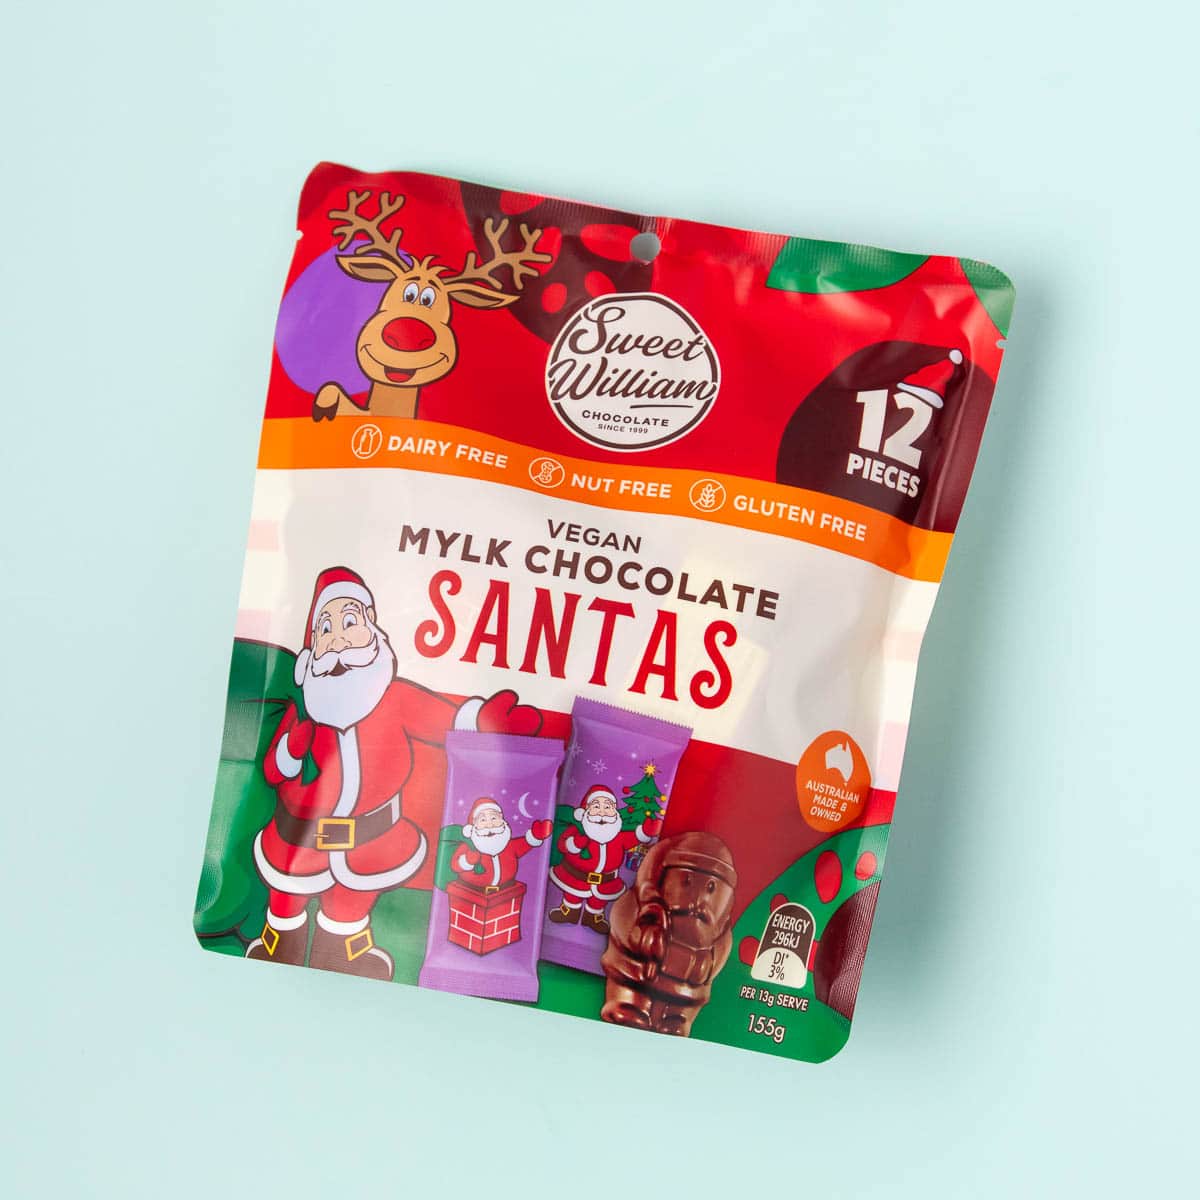 A bag of Sweet William mylk chocolate Santas, on a mint green background.